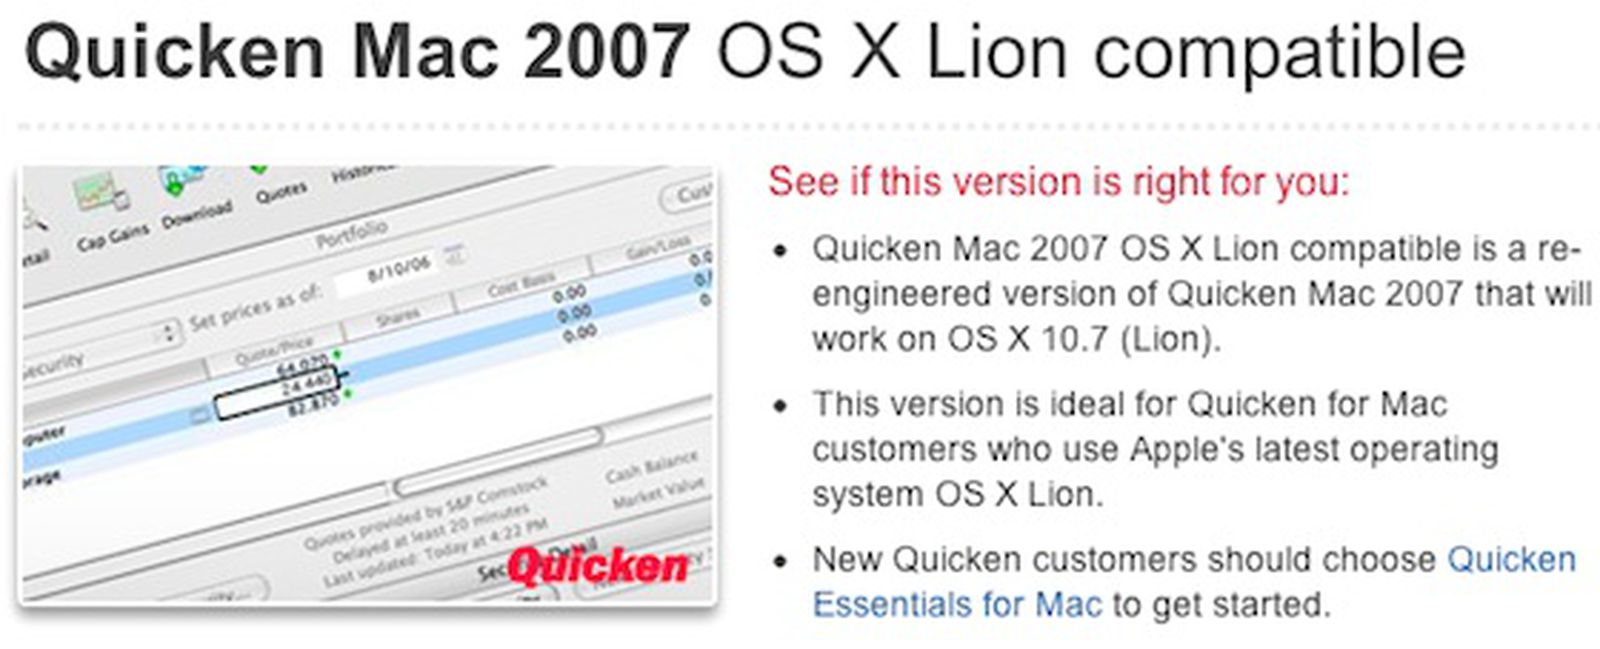 freeware software compatible with quicken 2007 for mac